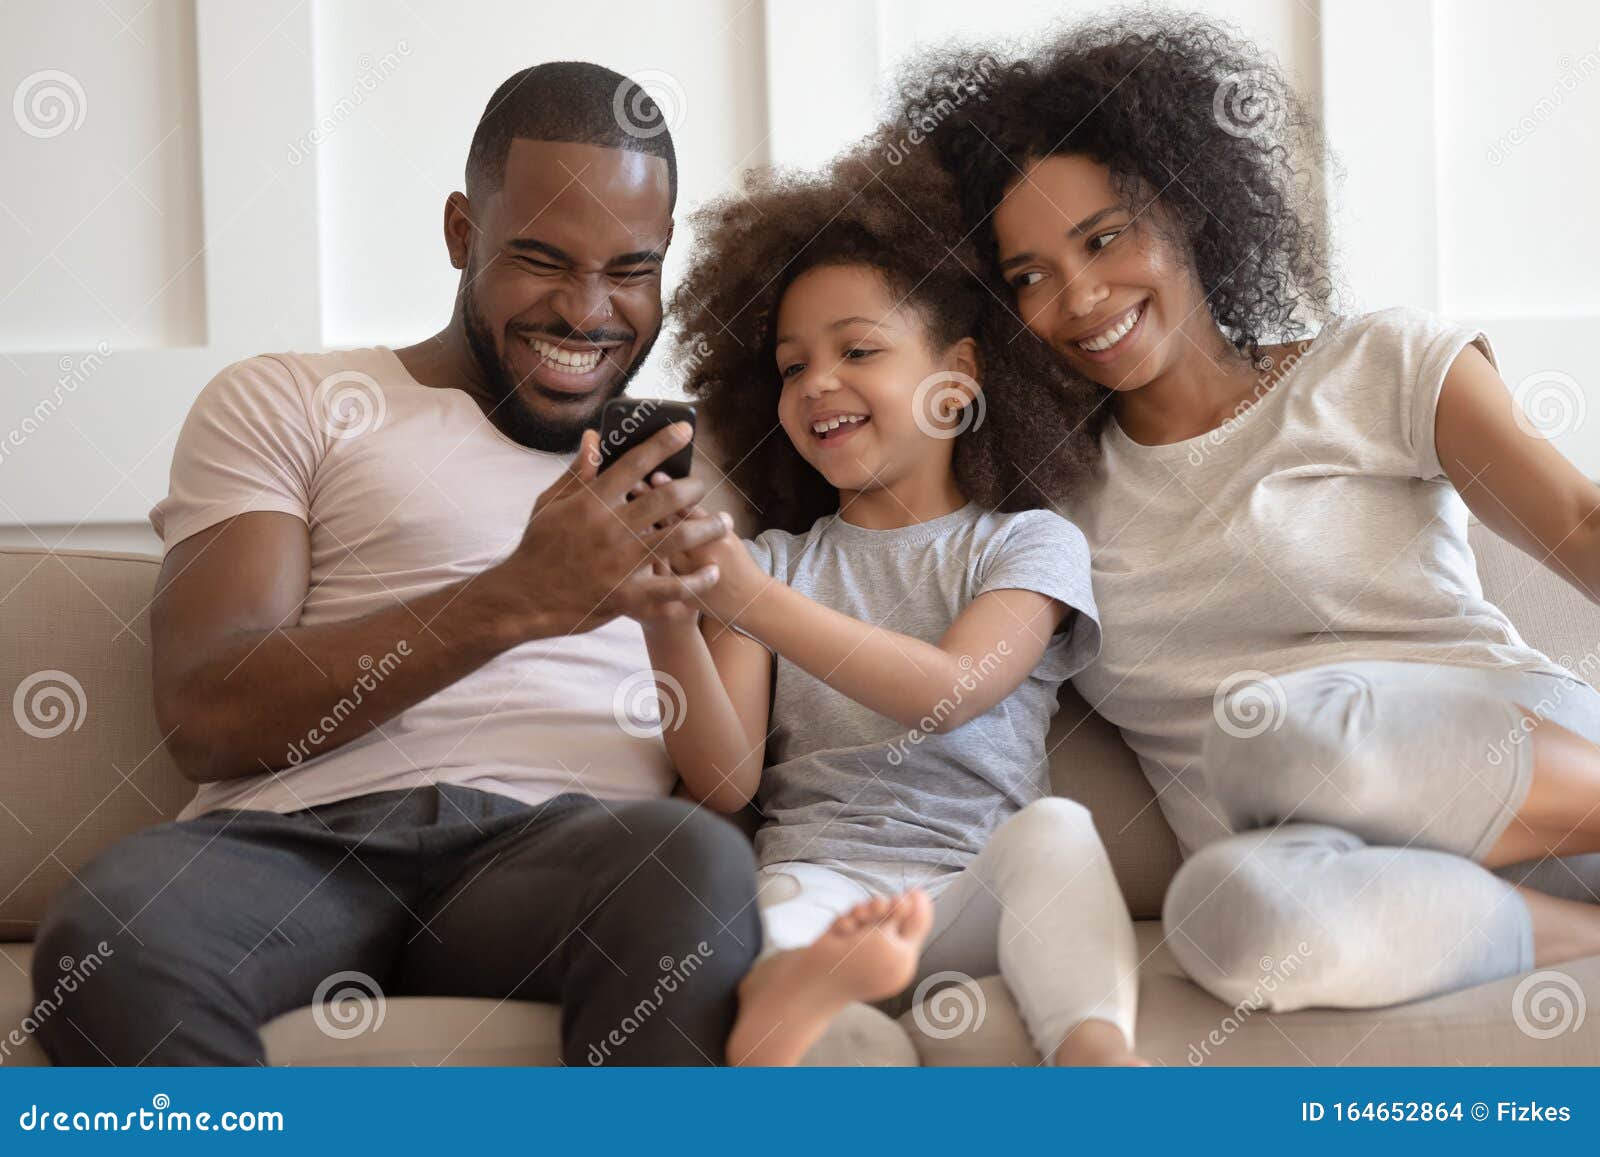 smiling biracial family with kid laugh enjoy video on cell